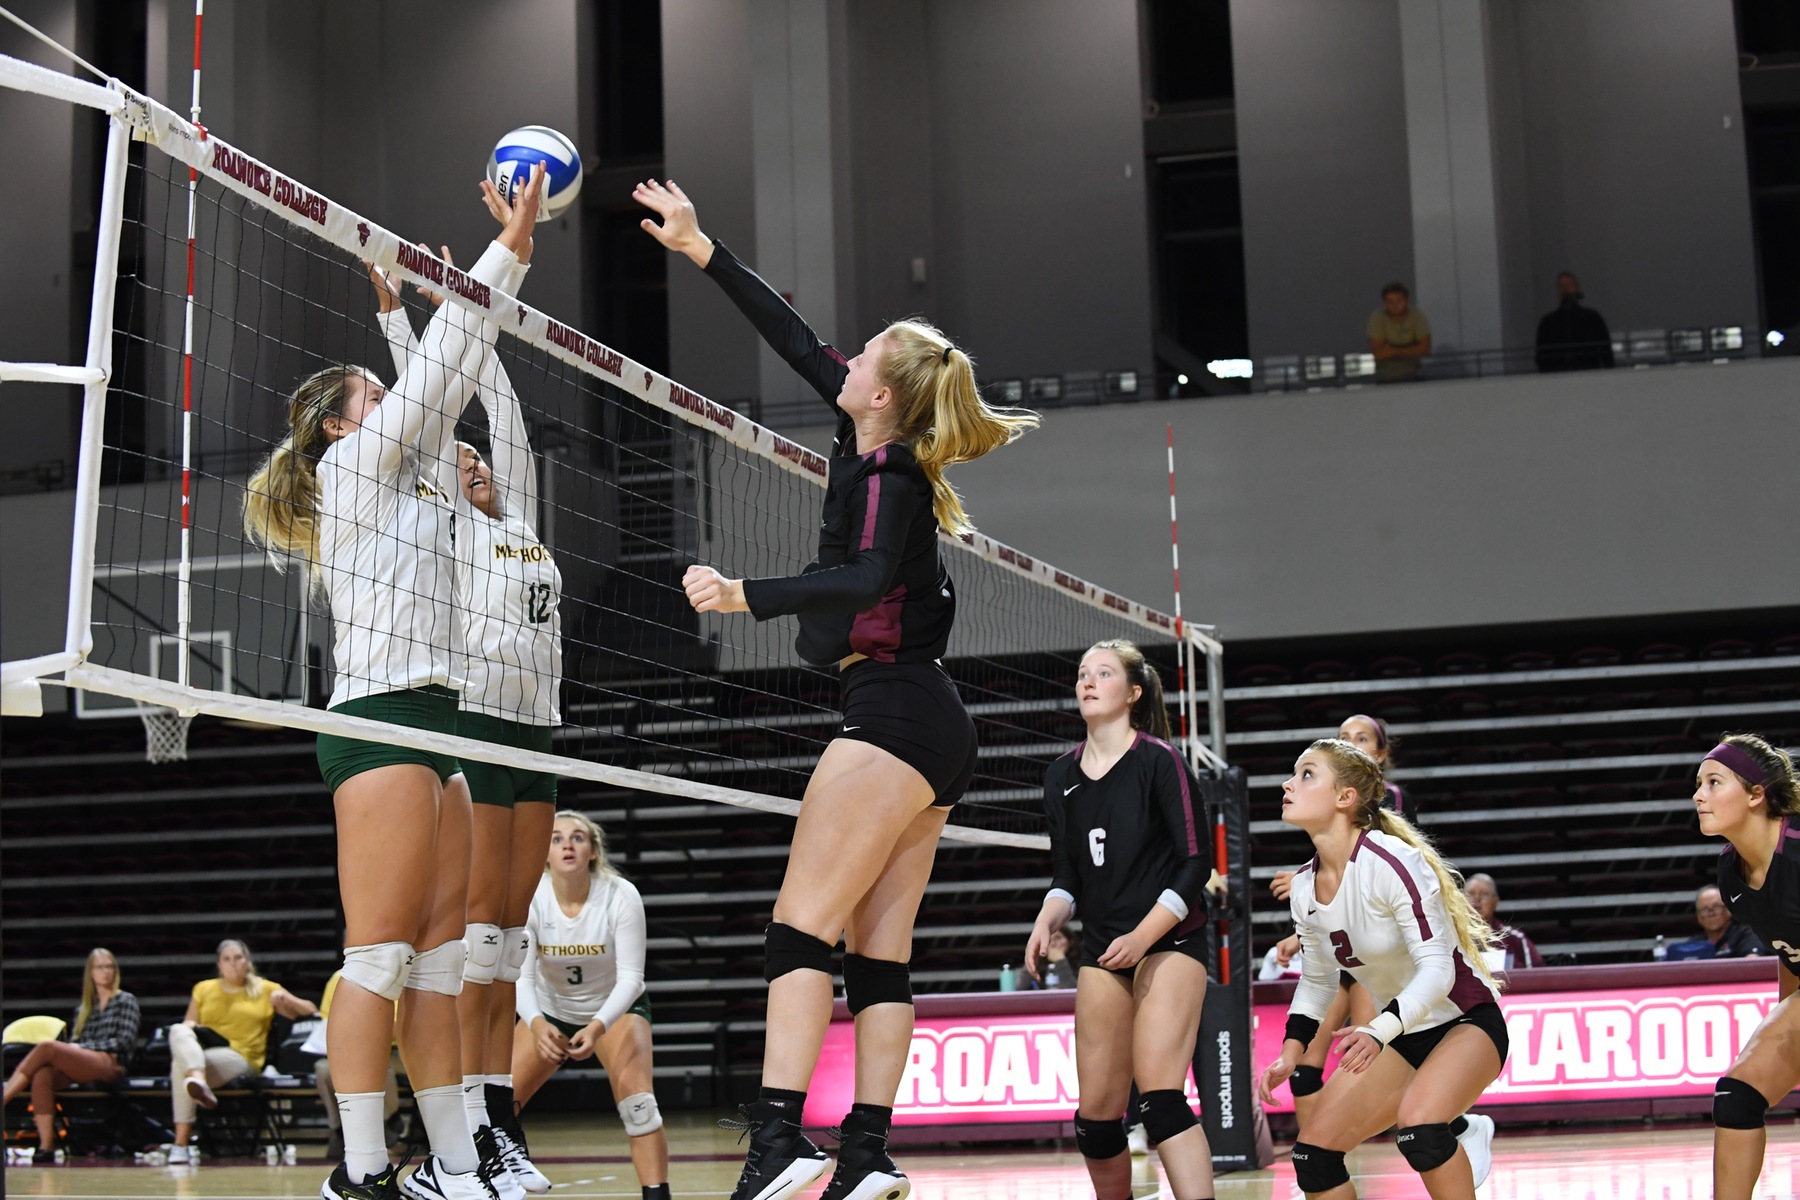 action photo of Roanoke Vb player Keely Scott attacking at the net